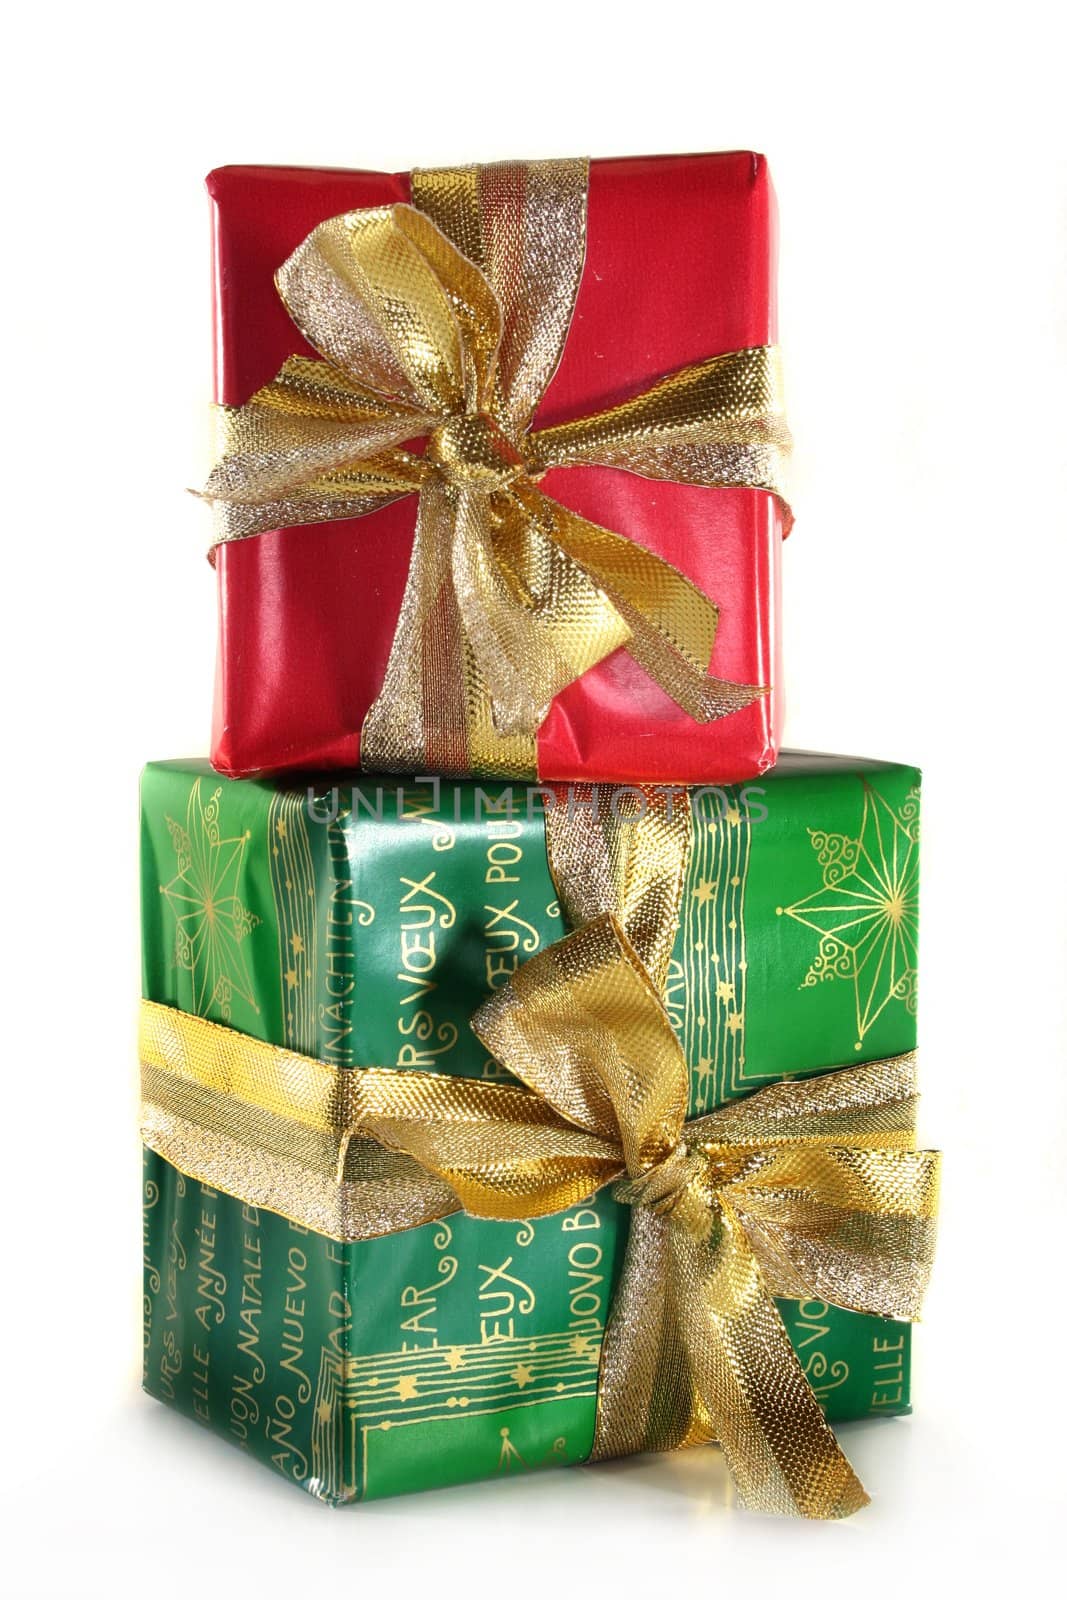 Christmas gifts by silencefoto